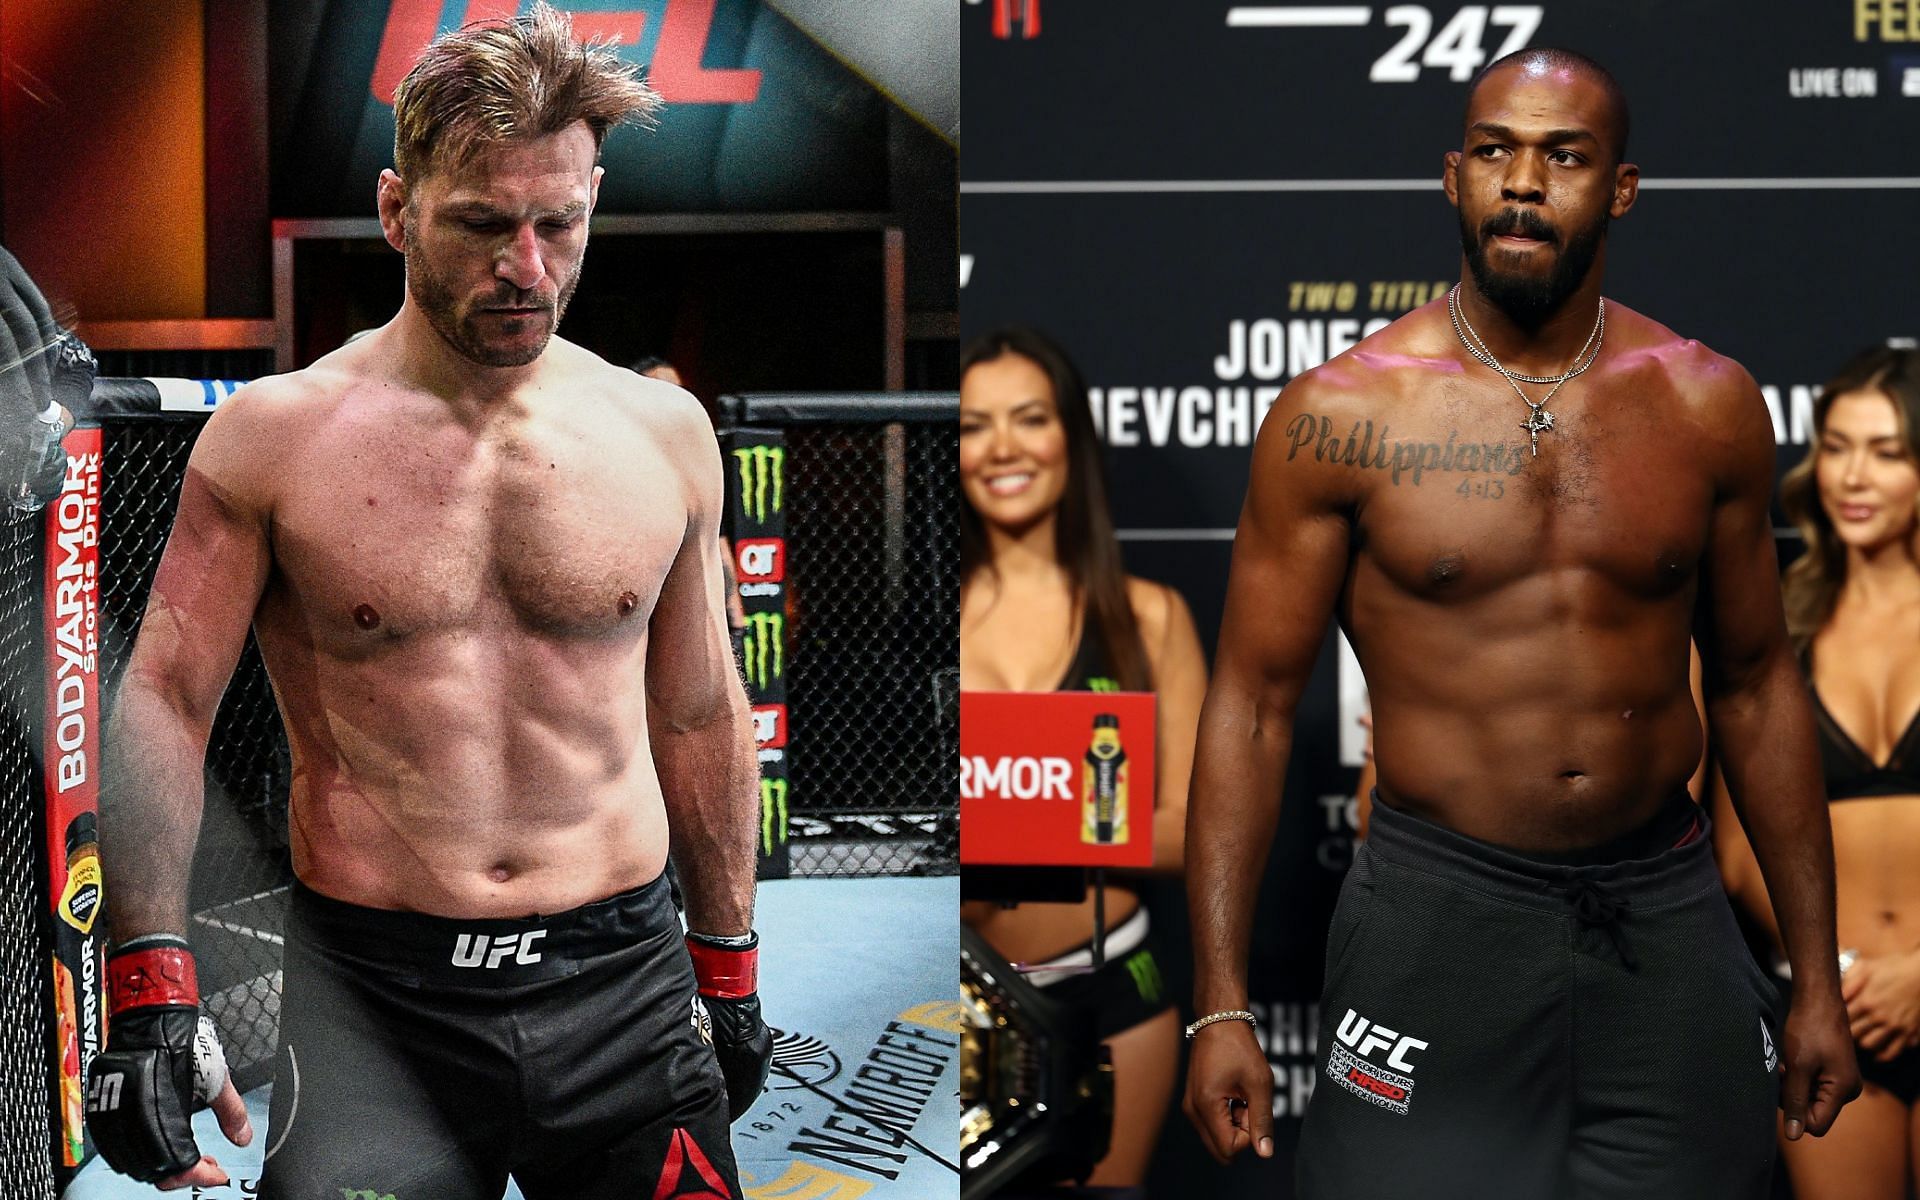 Stipe Miocic and Jon Jones [Image credits: Getty Images and @espnmma on Twitter]